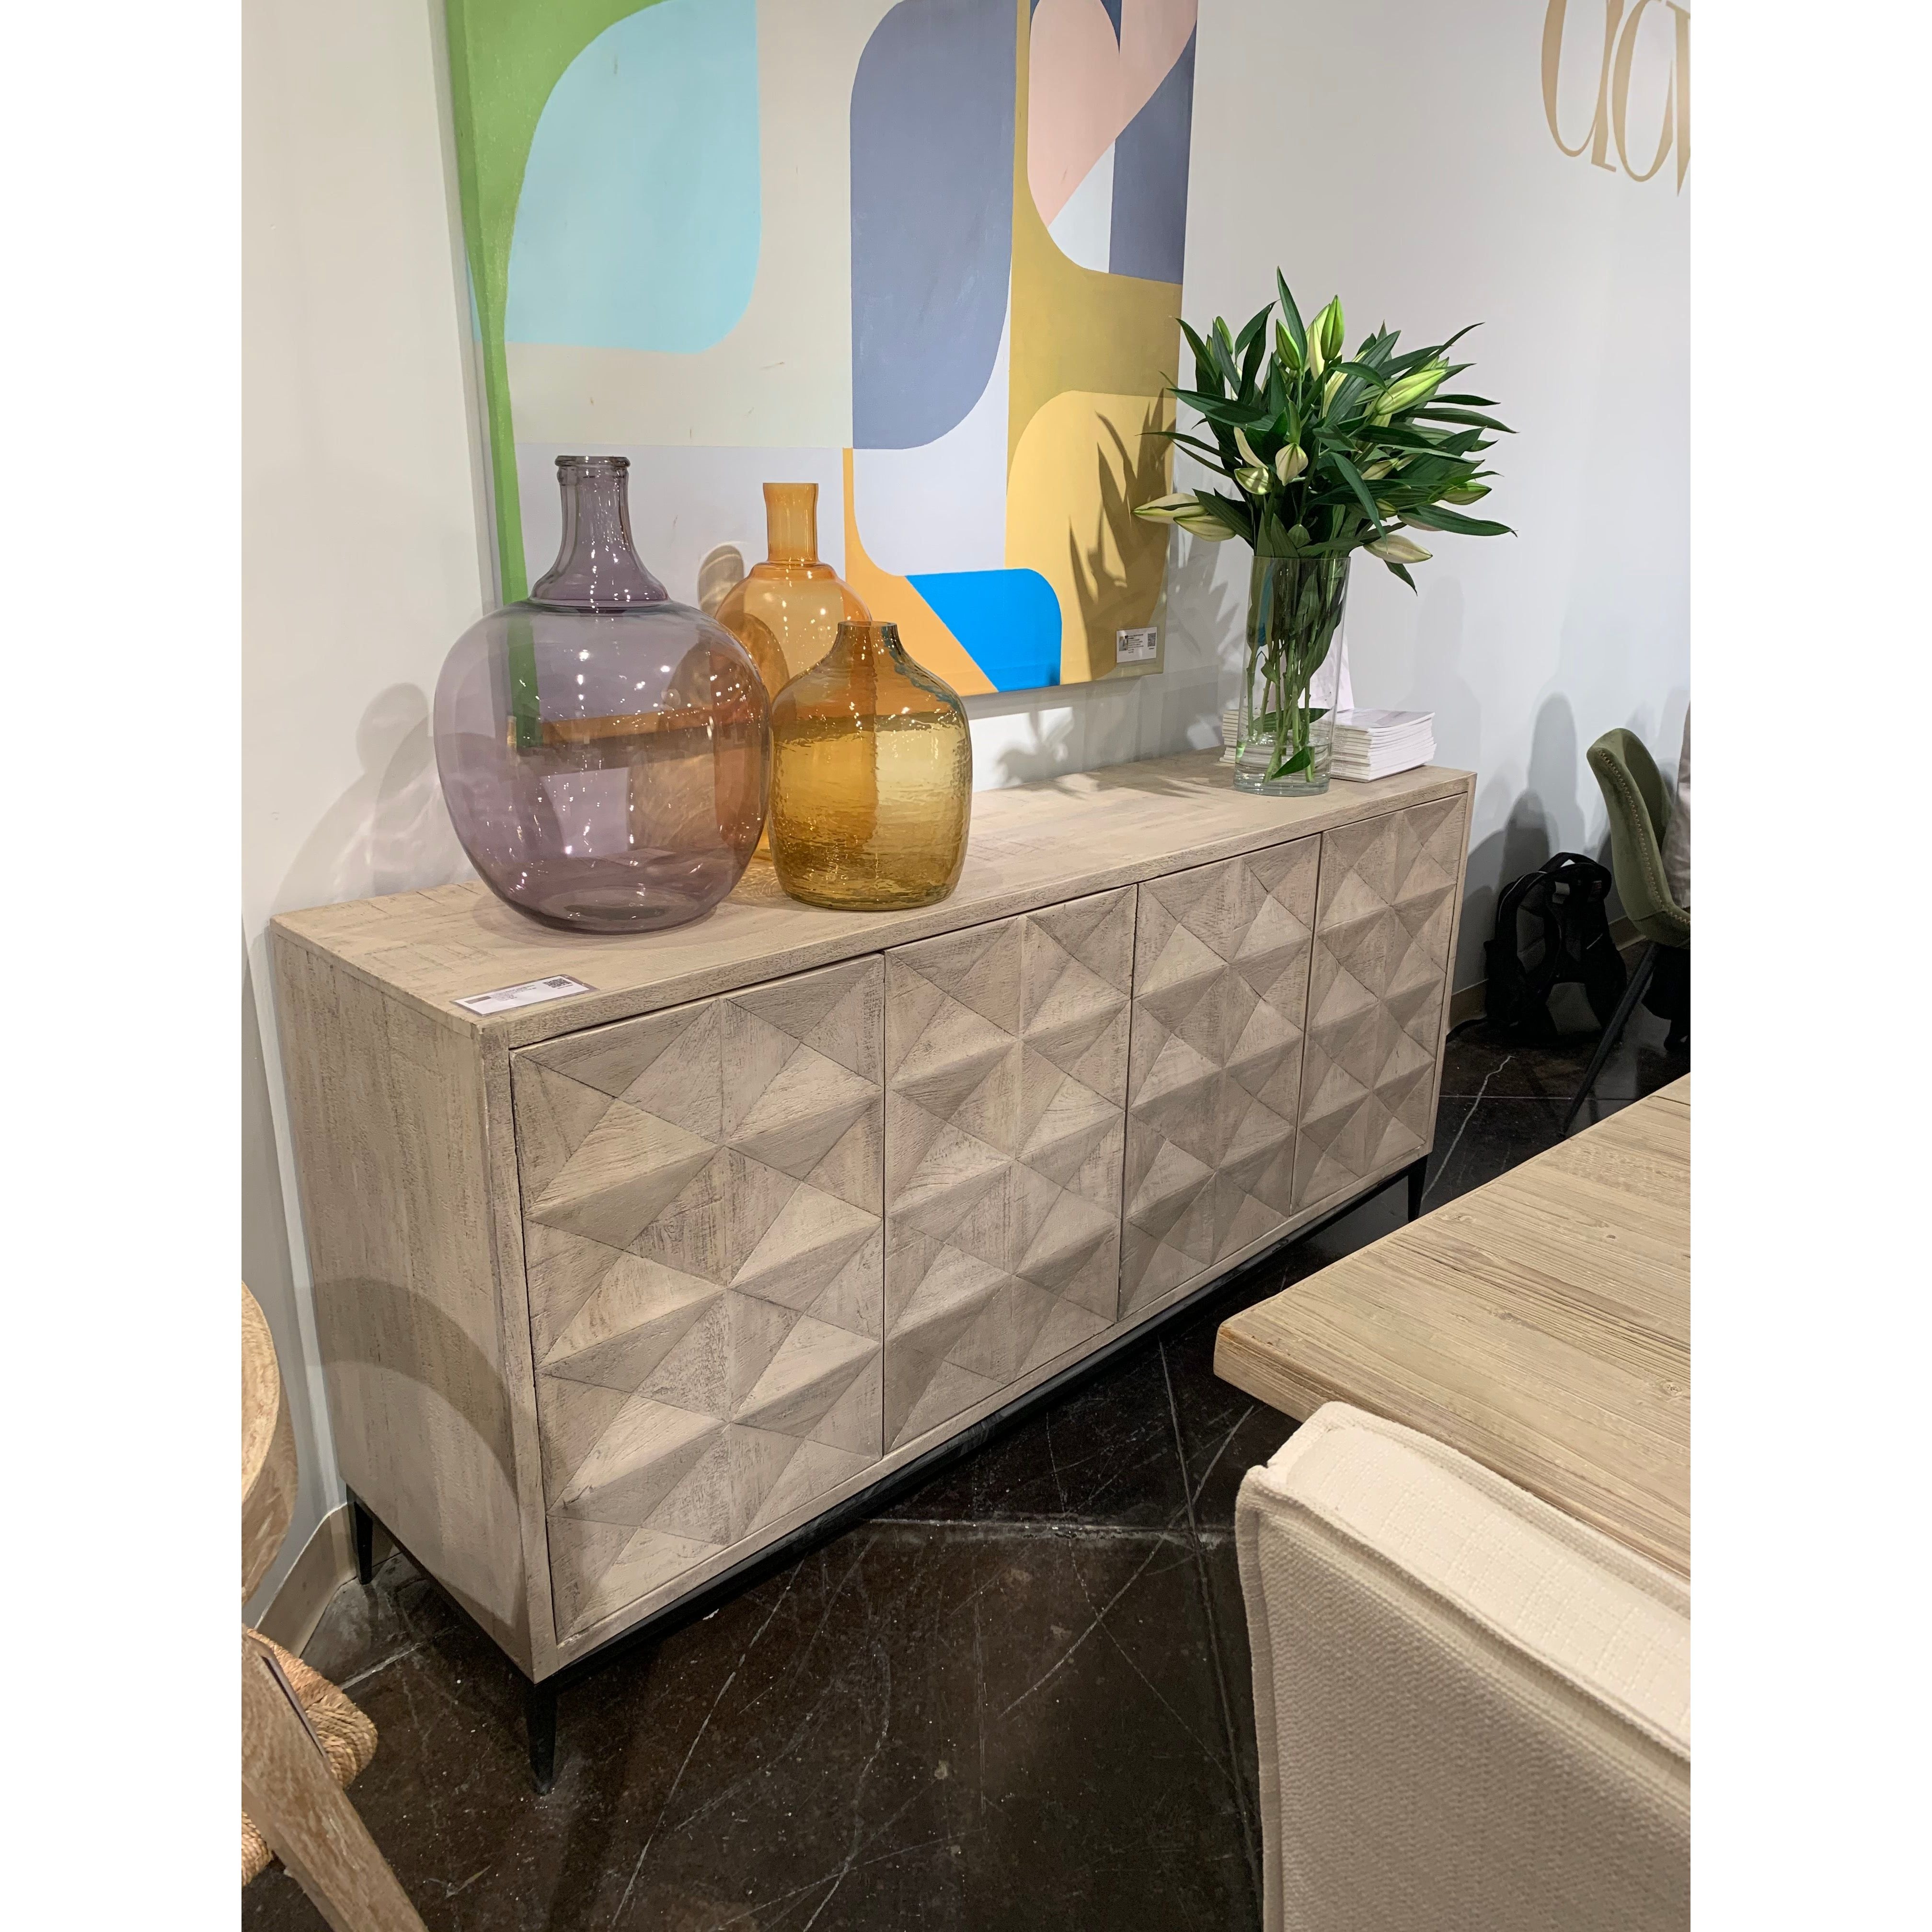 We love the textures found on this Montero Sideboard.  A wash of white and a light distressing add a whisper of color and texture to enhance this striking sideboard’s finish.   RECYCLED PINE ON IRON BASE GREY WHITE WASH FINISH Size: 84"l x 19"d x 37"h